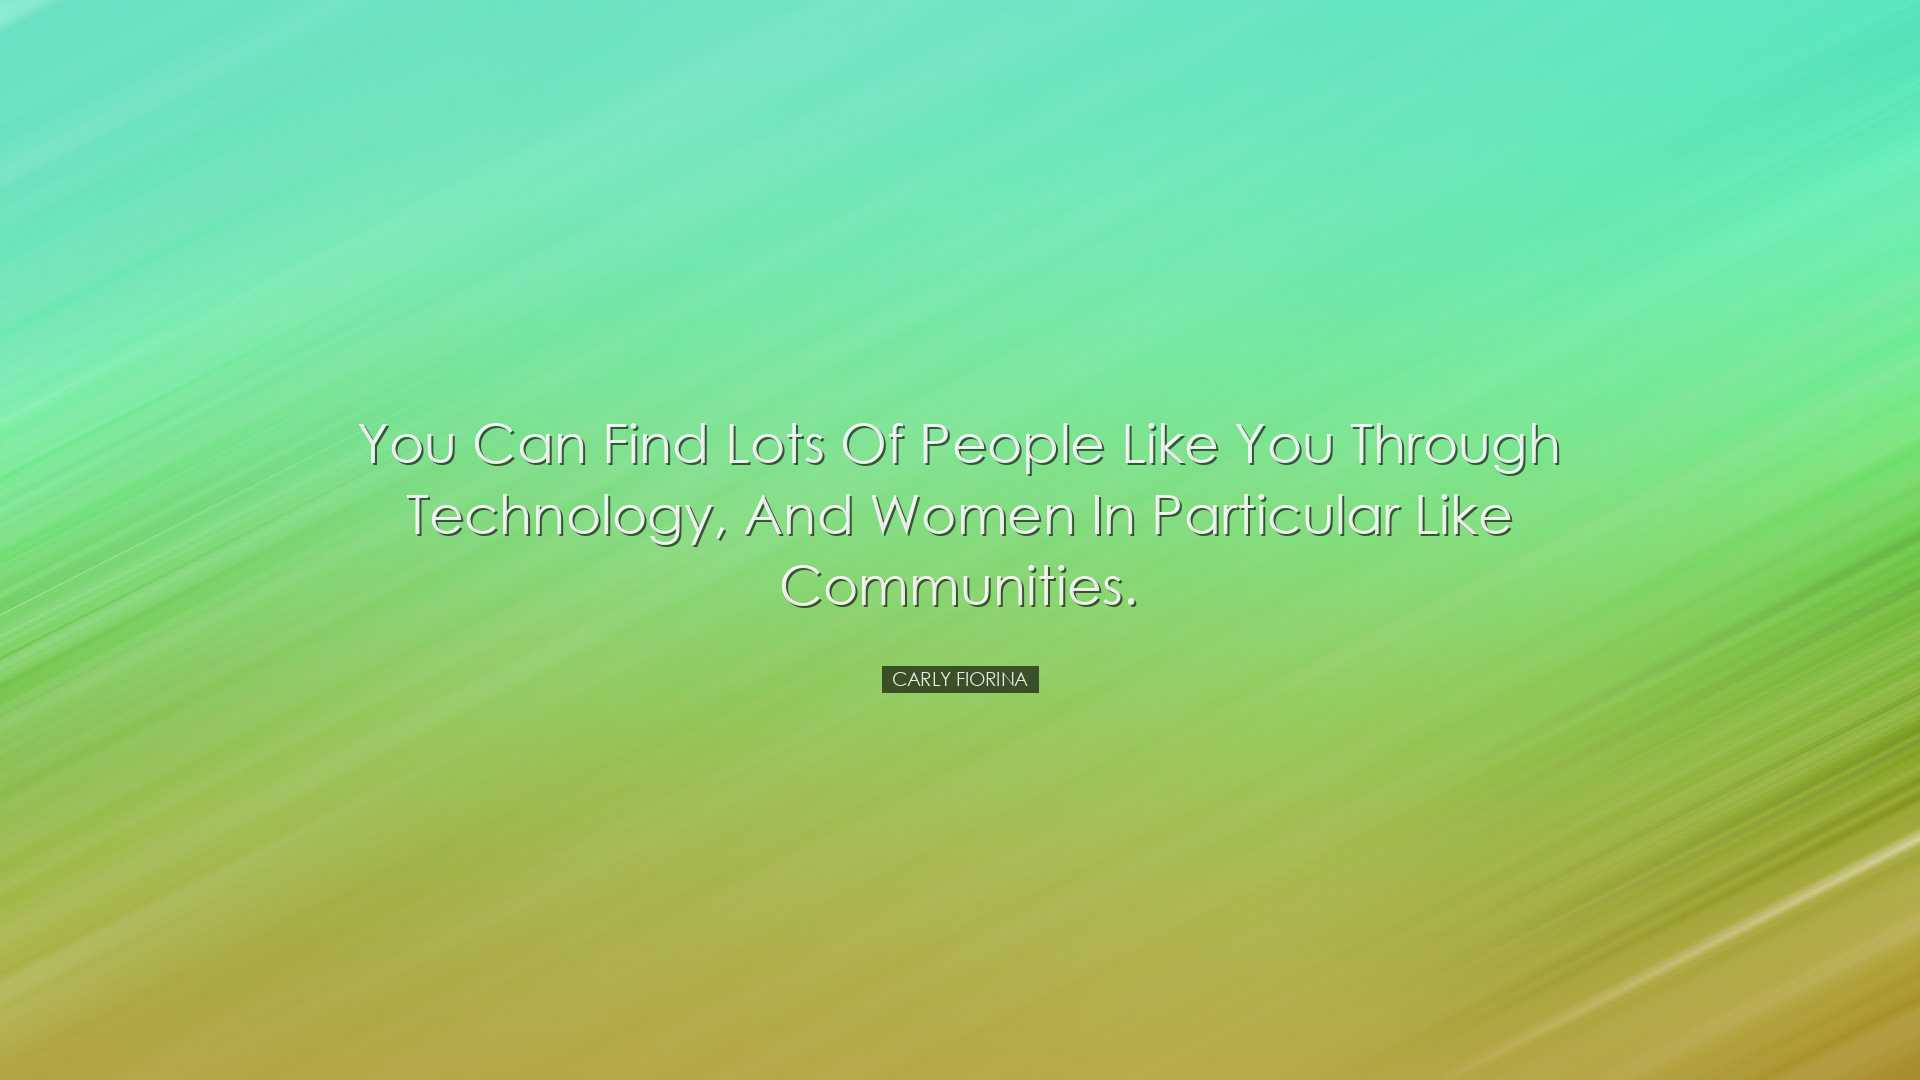 You can find lots of people like you through technology, and women